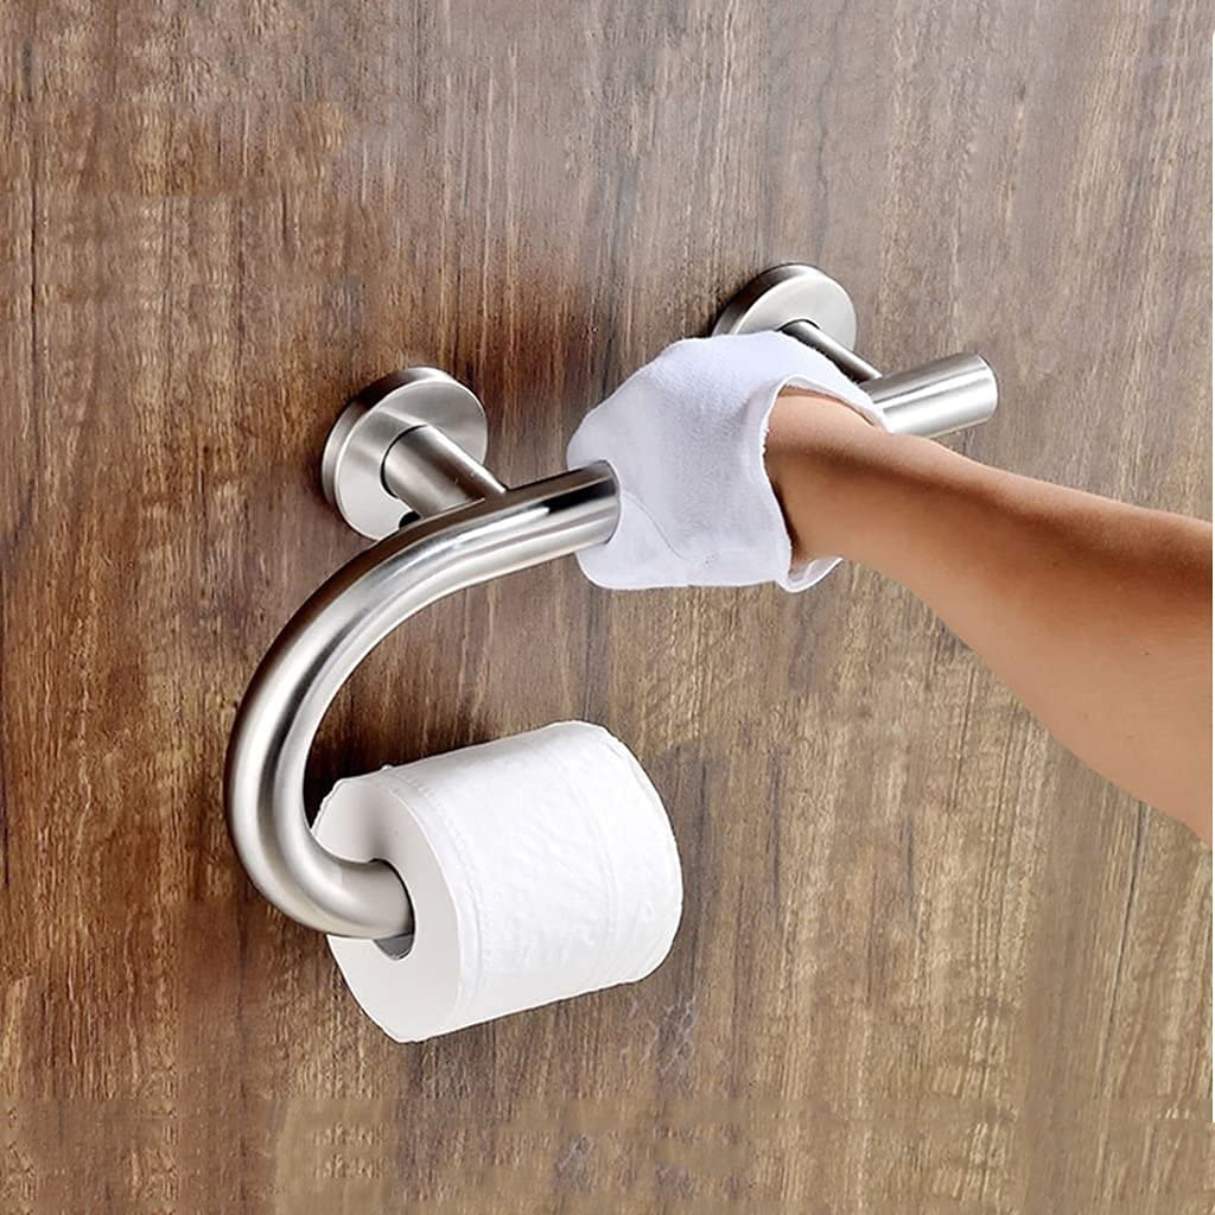 Which Direction To Mount A U-Shaped Toilet Paper Holder